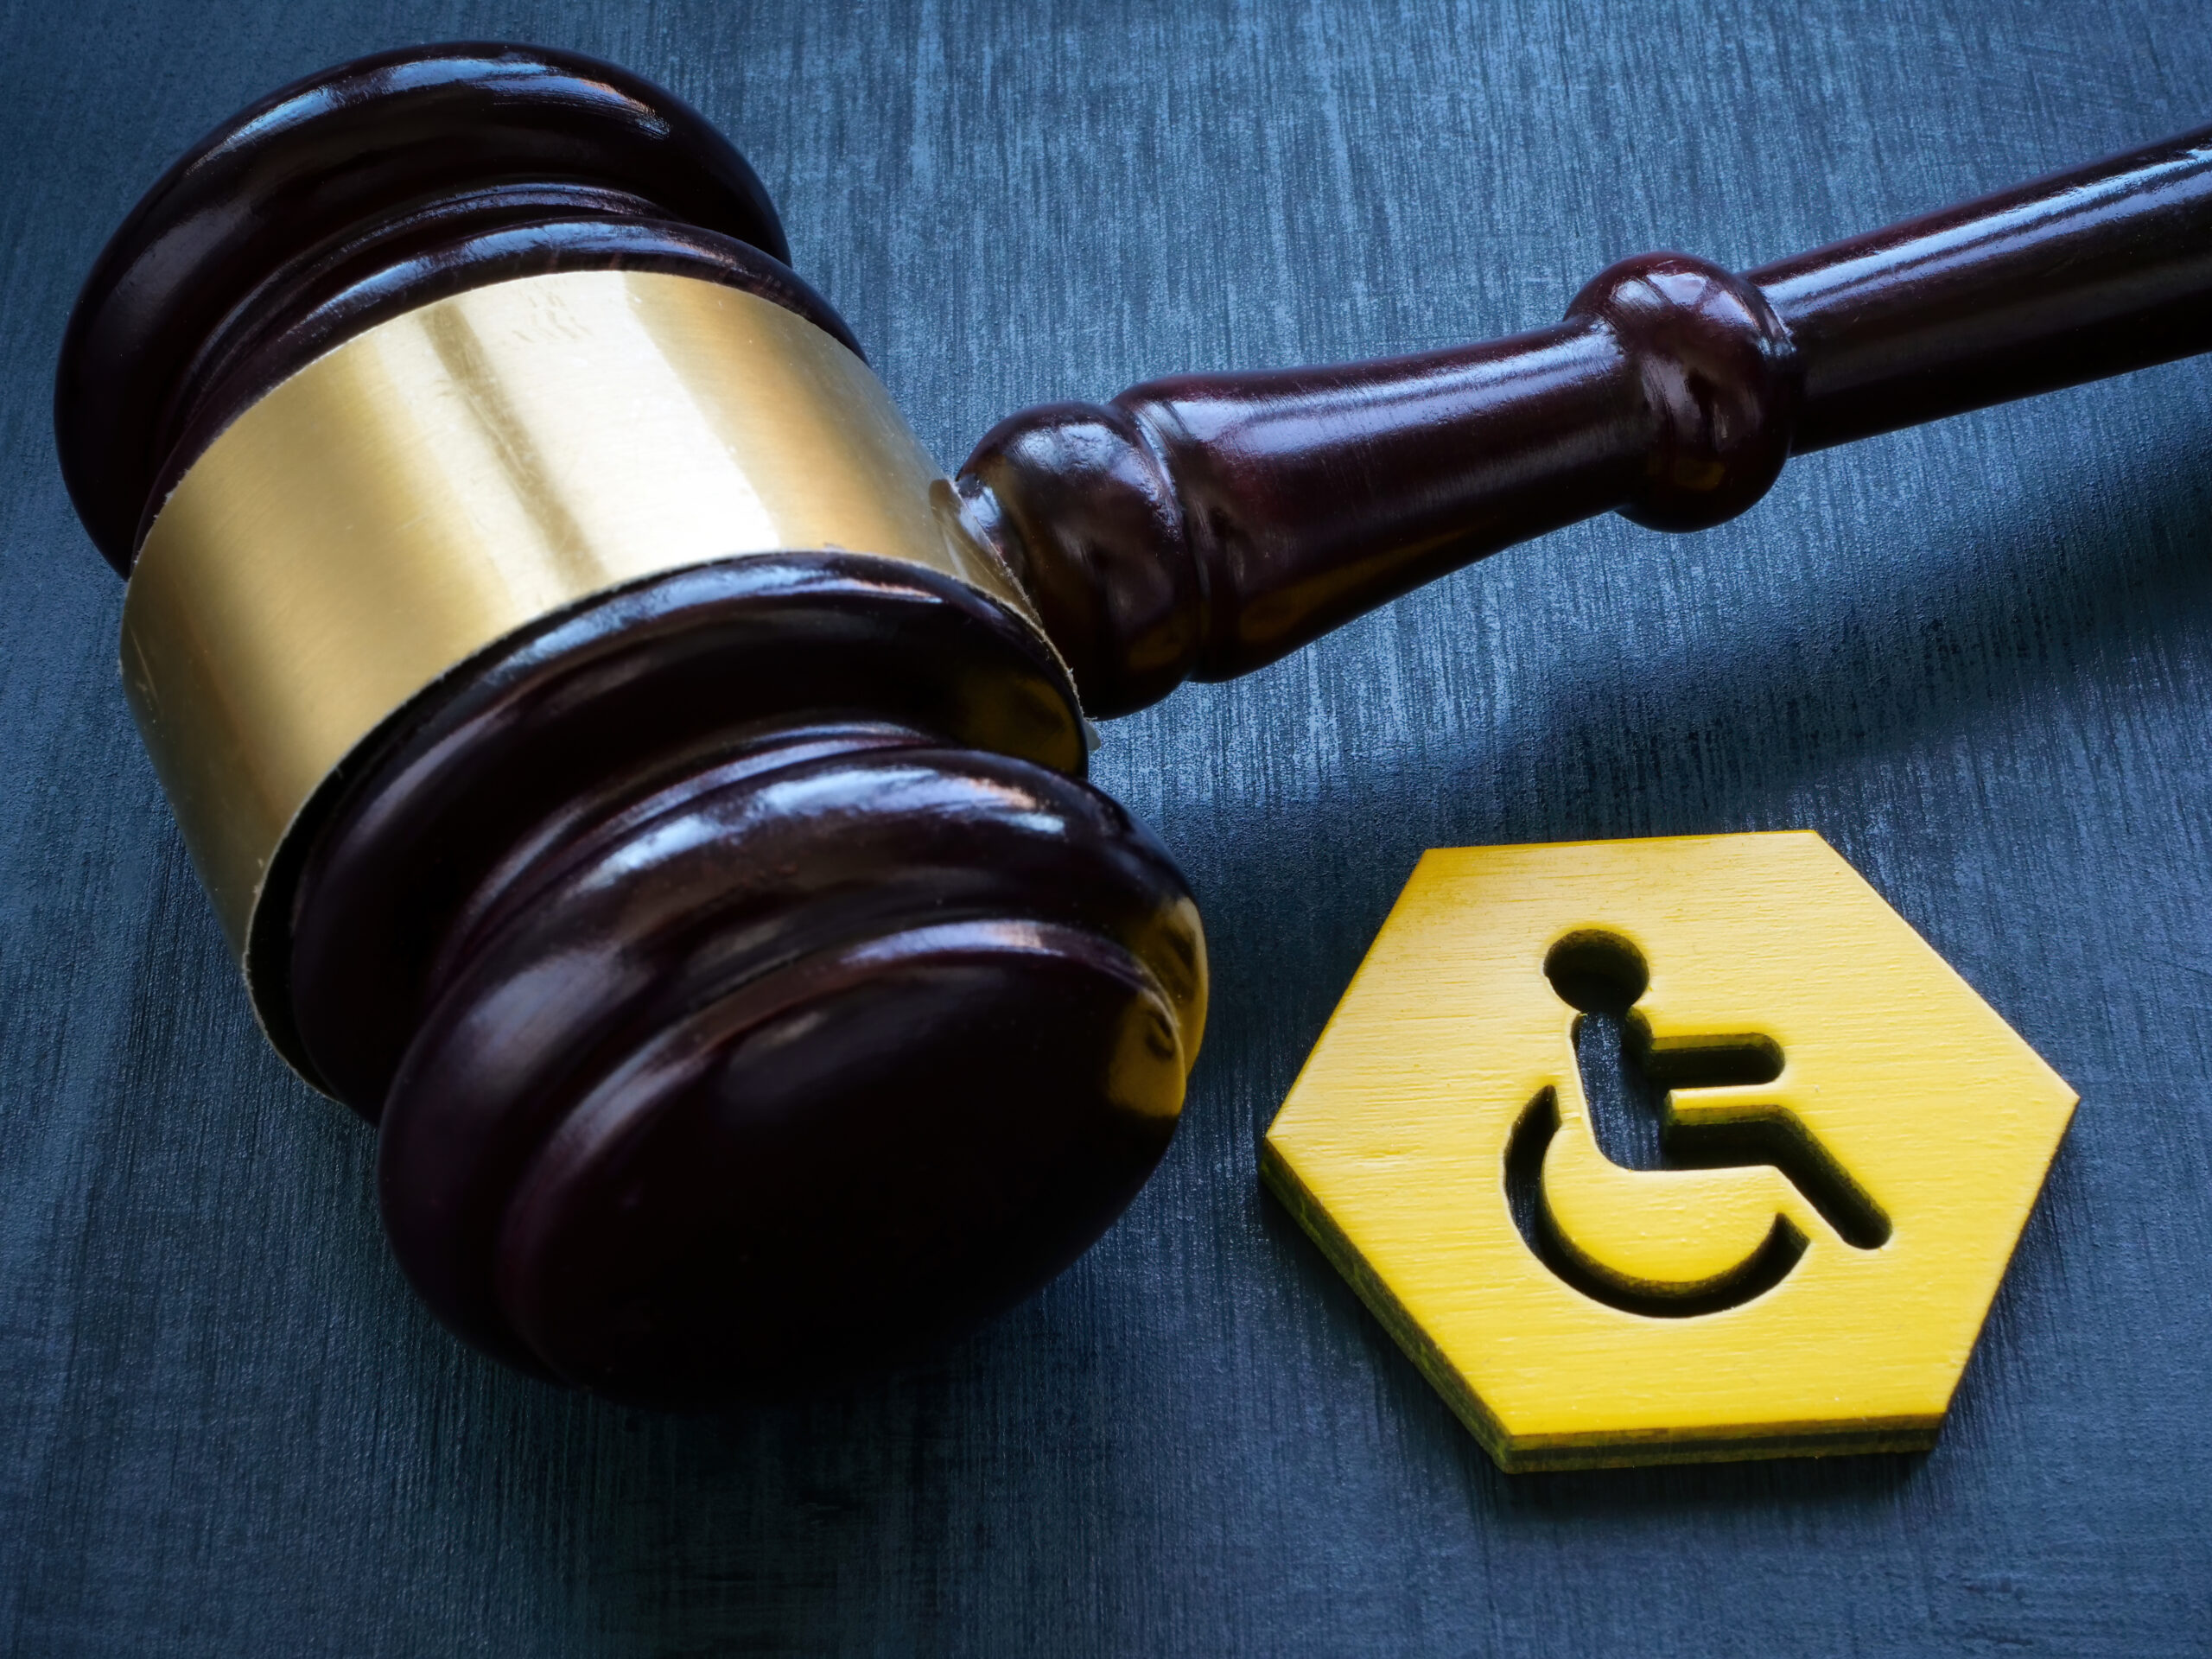 https://www.istockphoto.com/photo/gavel-as-symbol-of-law-and-disability-person-sign-gm1494494355-517806579